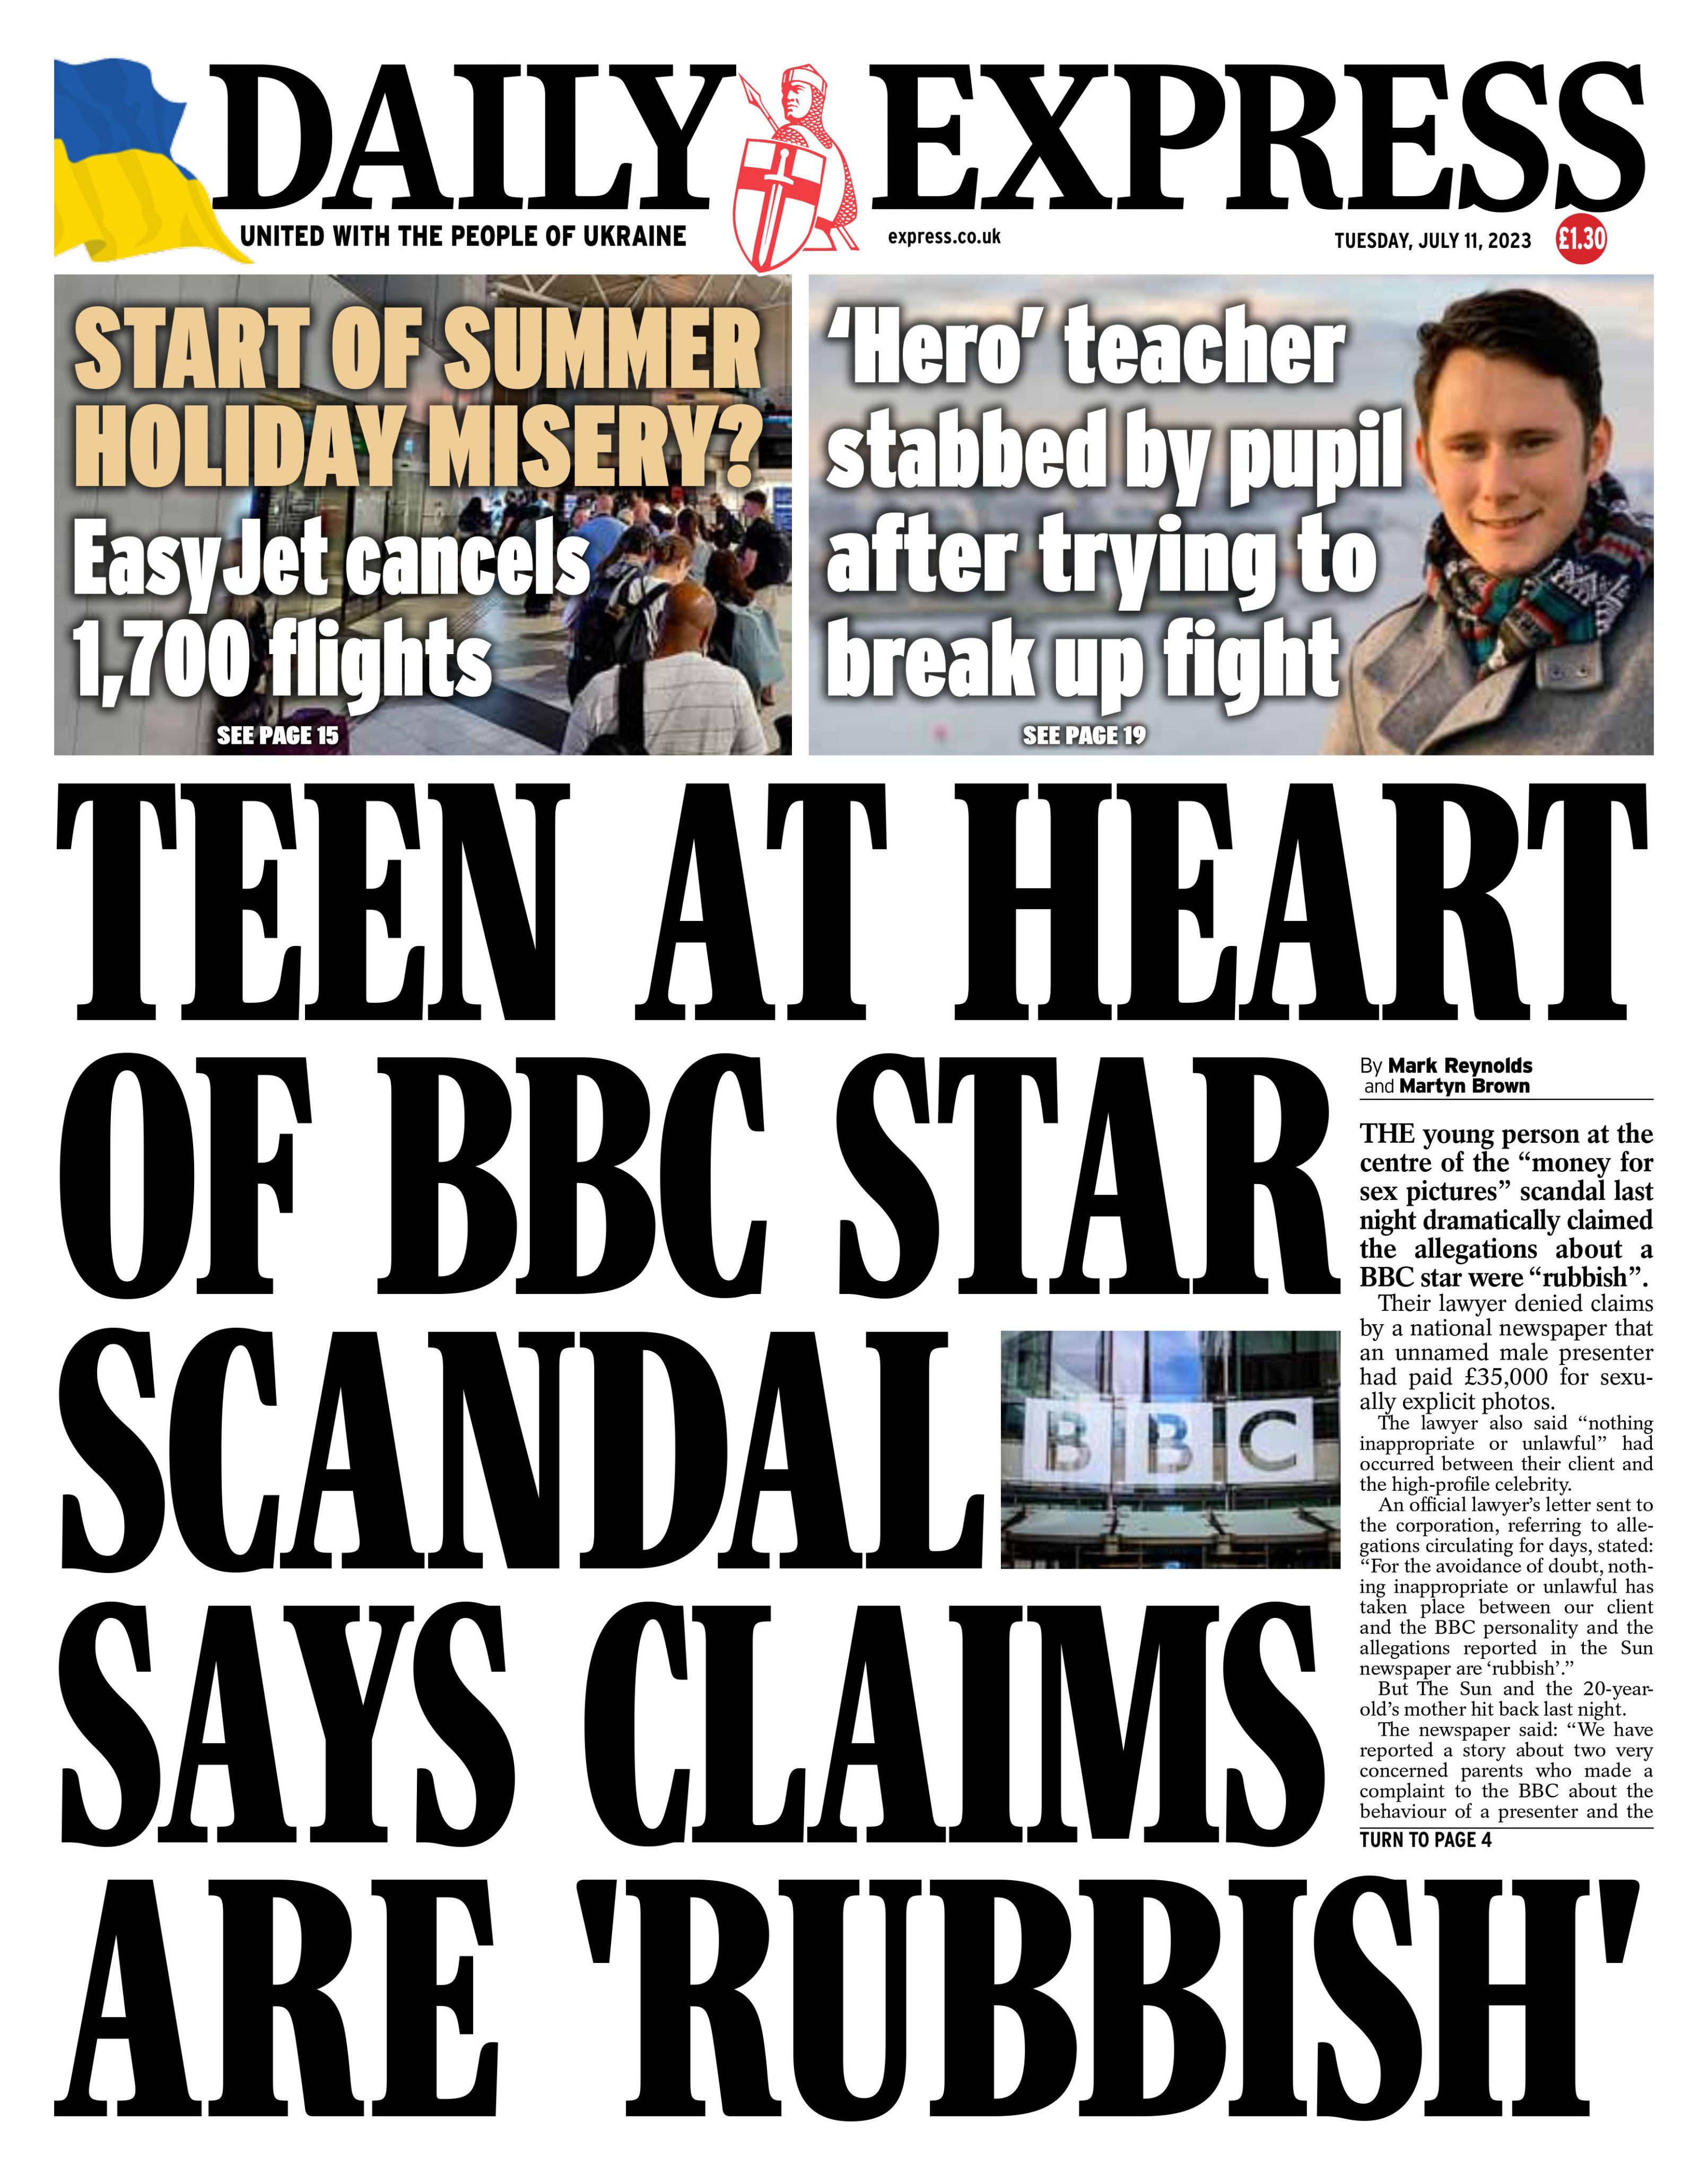 Daily Express Front Page: Teen At Heart Of BBC Star Scandal Says Claims Are 'Rubbish' 